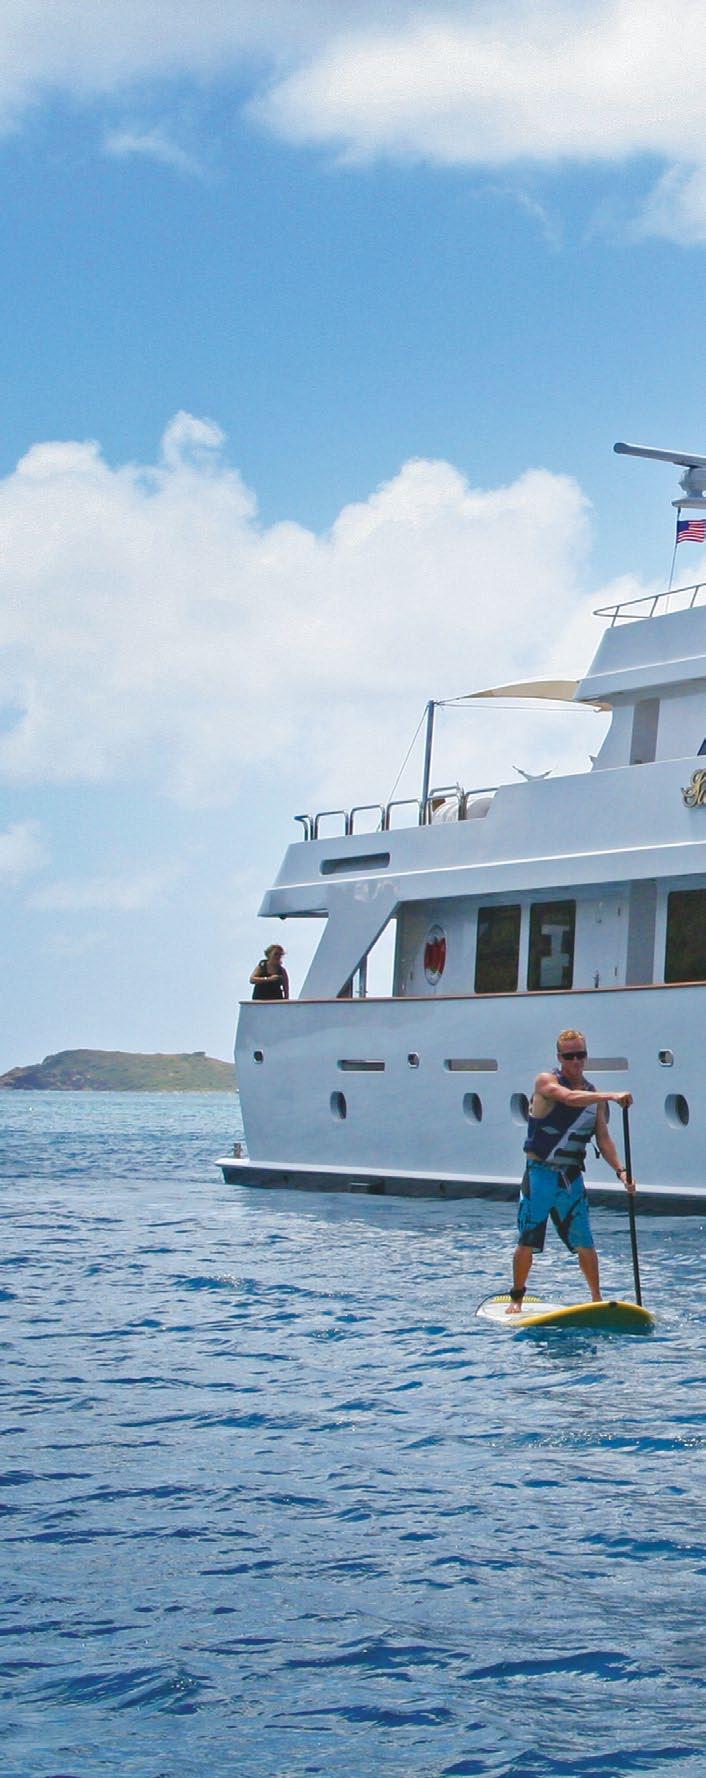 CHARTER Captain Paulo Guedes and his crew make life fun aboard Sweet Escape Magnetic Personality The charter program aboard the 130-foot Christensen Sweet Escape keeps luring guests back, in large